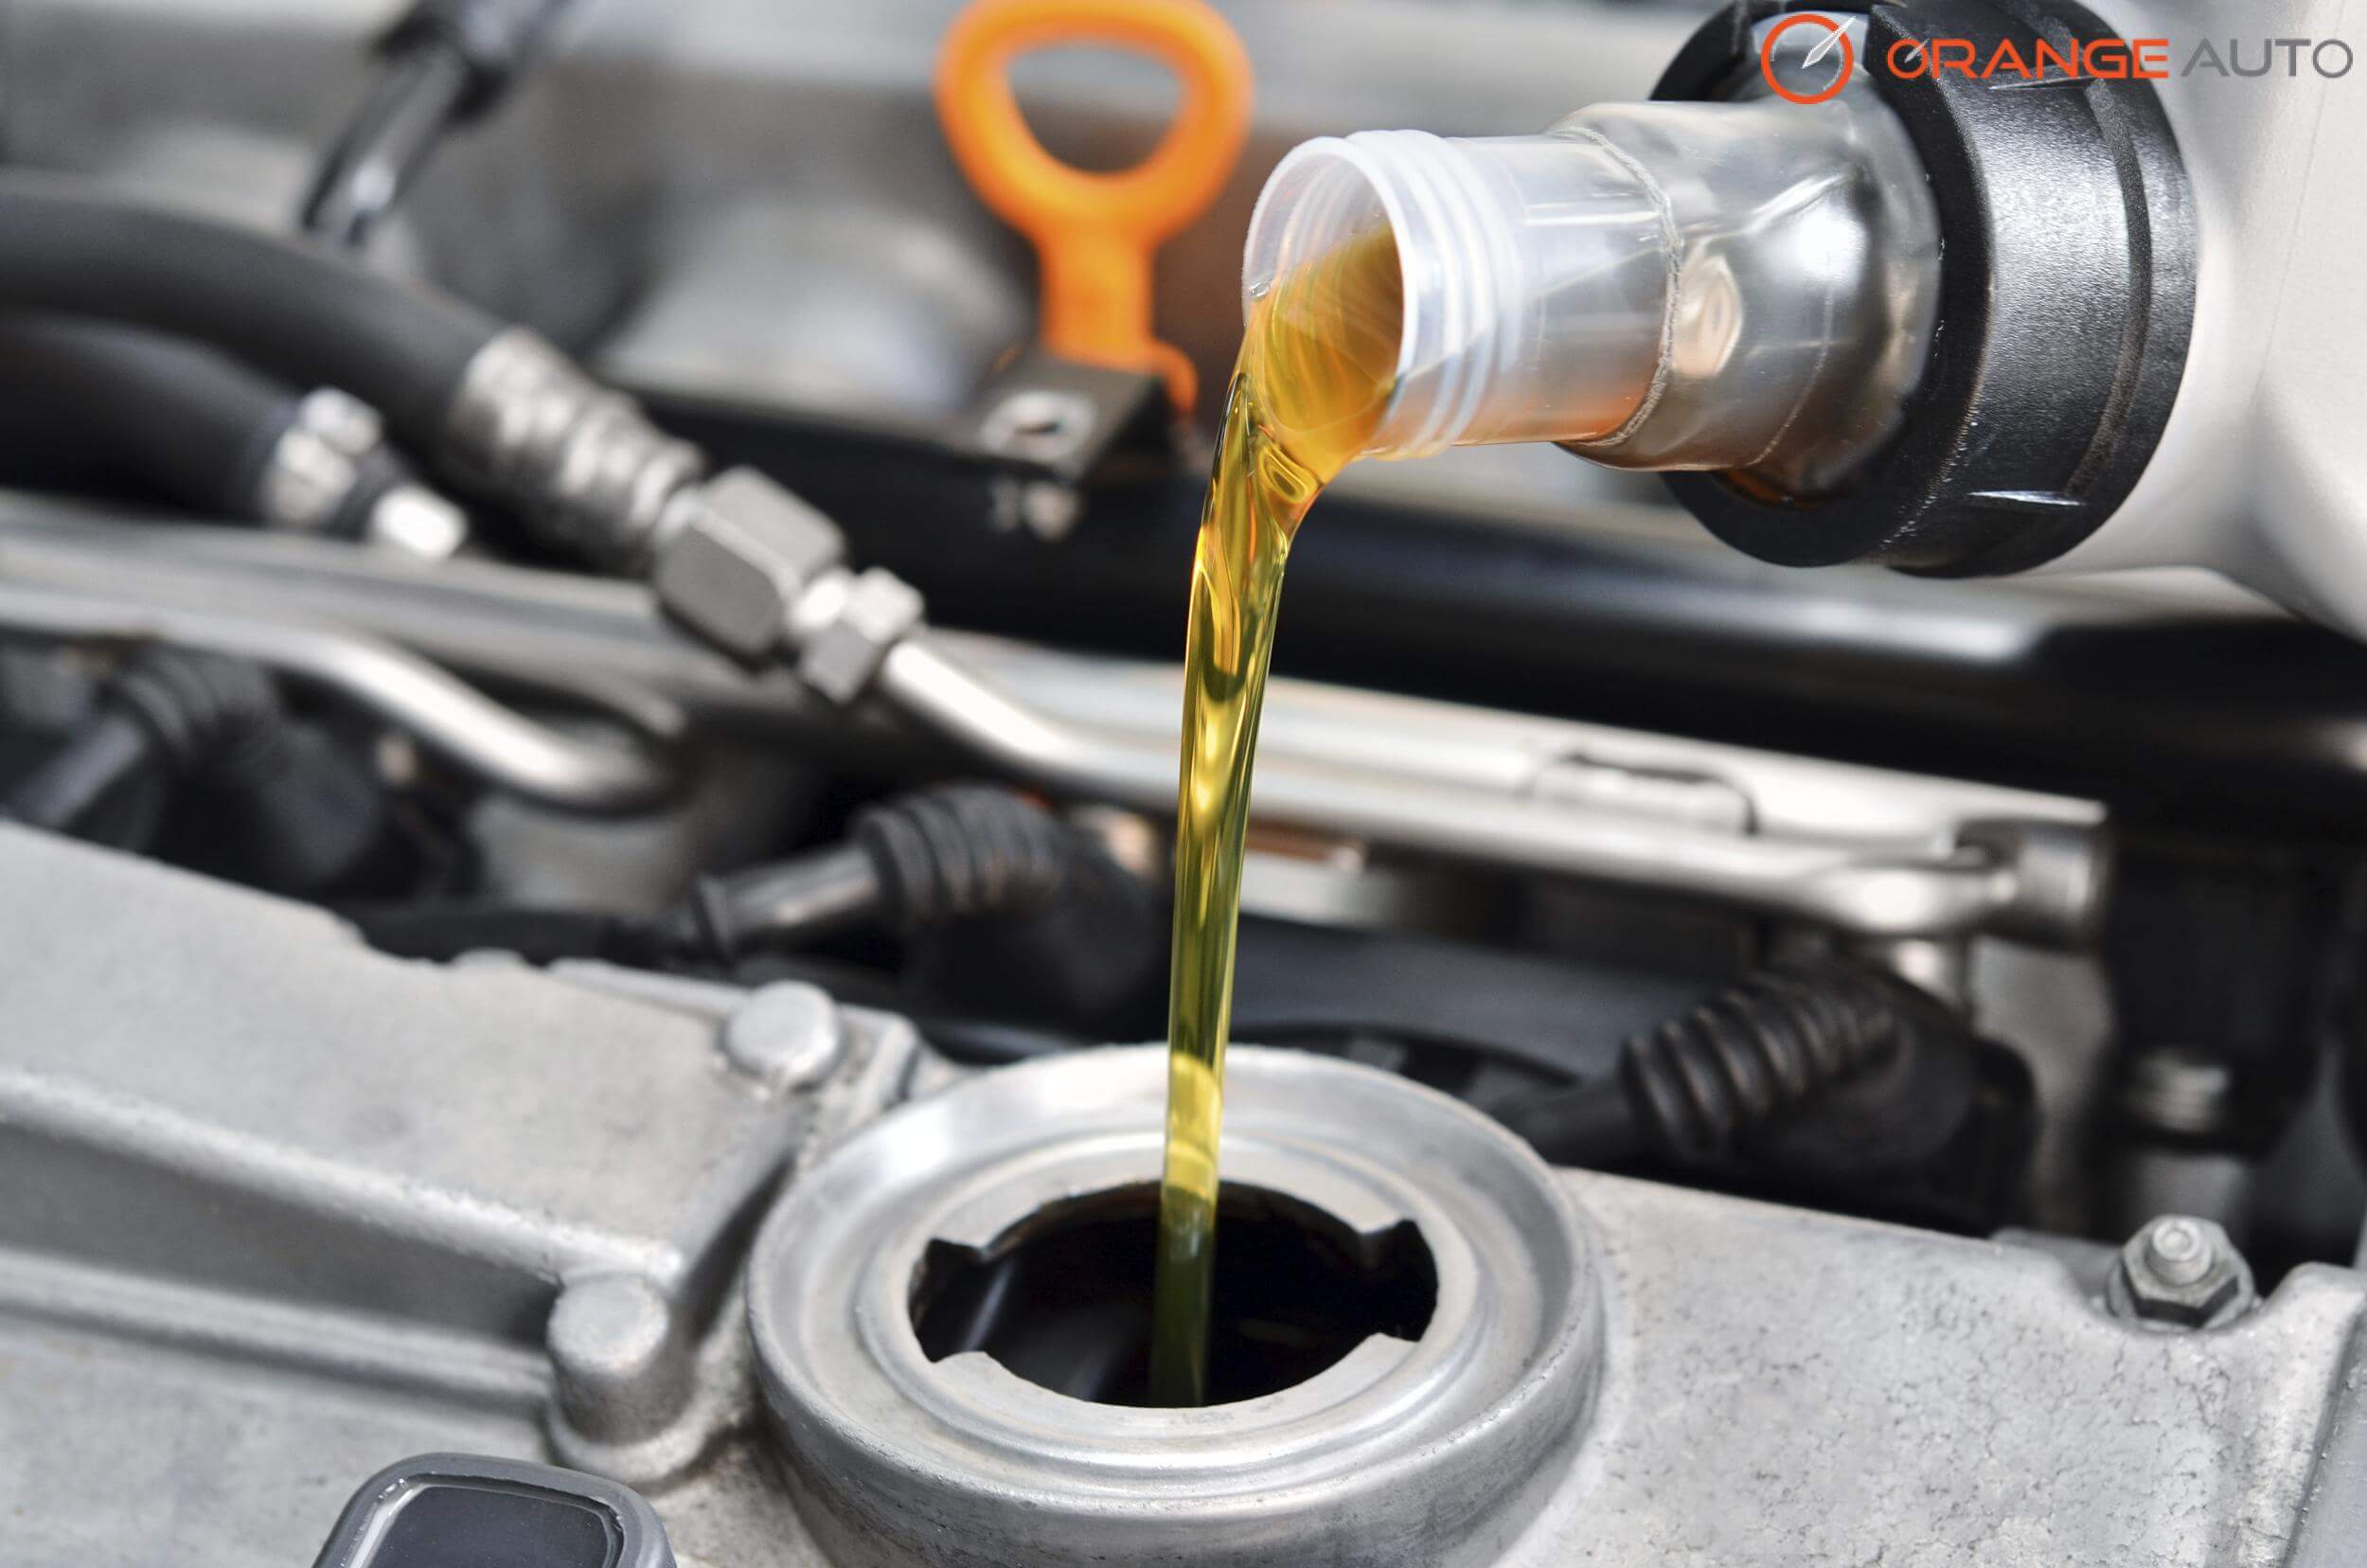 How Much Does an Oil Change Cost in Dubai?